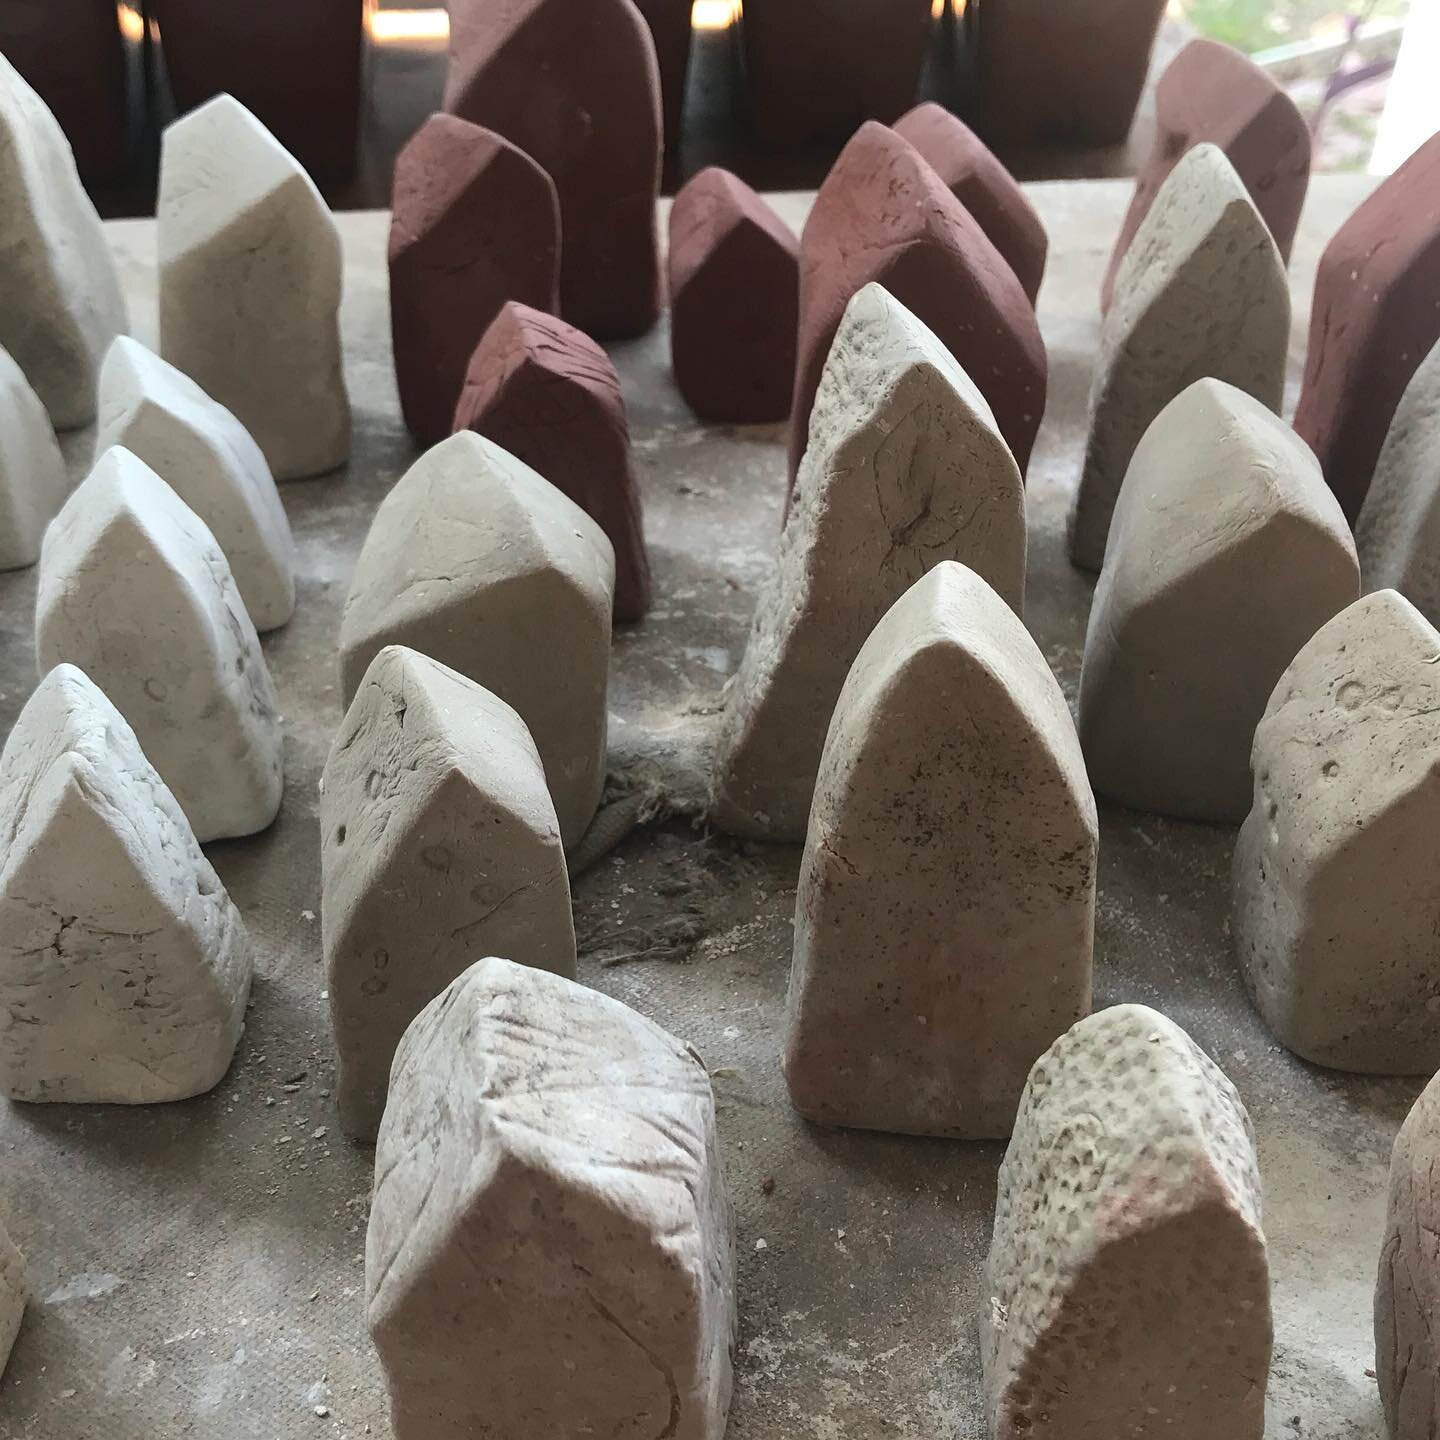 Clay houses for the show...